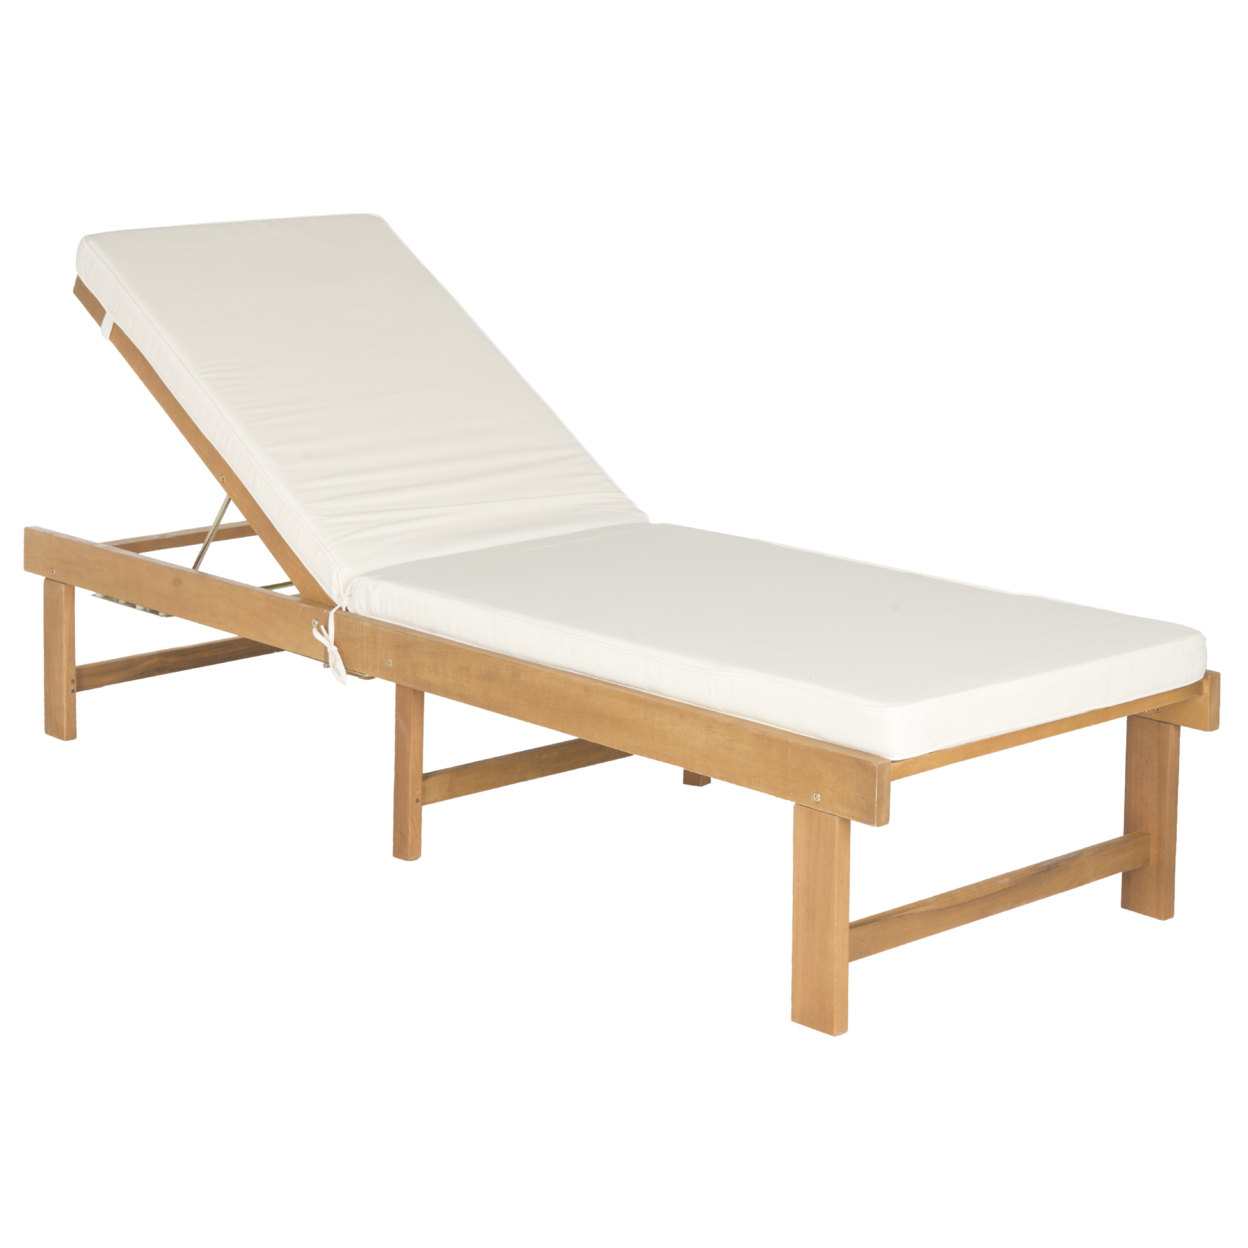 SAFAVIEH Outdoor Collection Inglewood Chaise Lounge Chair Natural/Beige